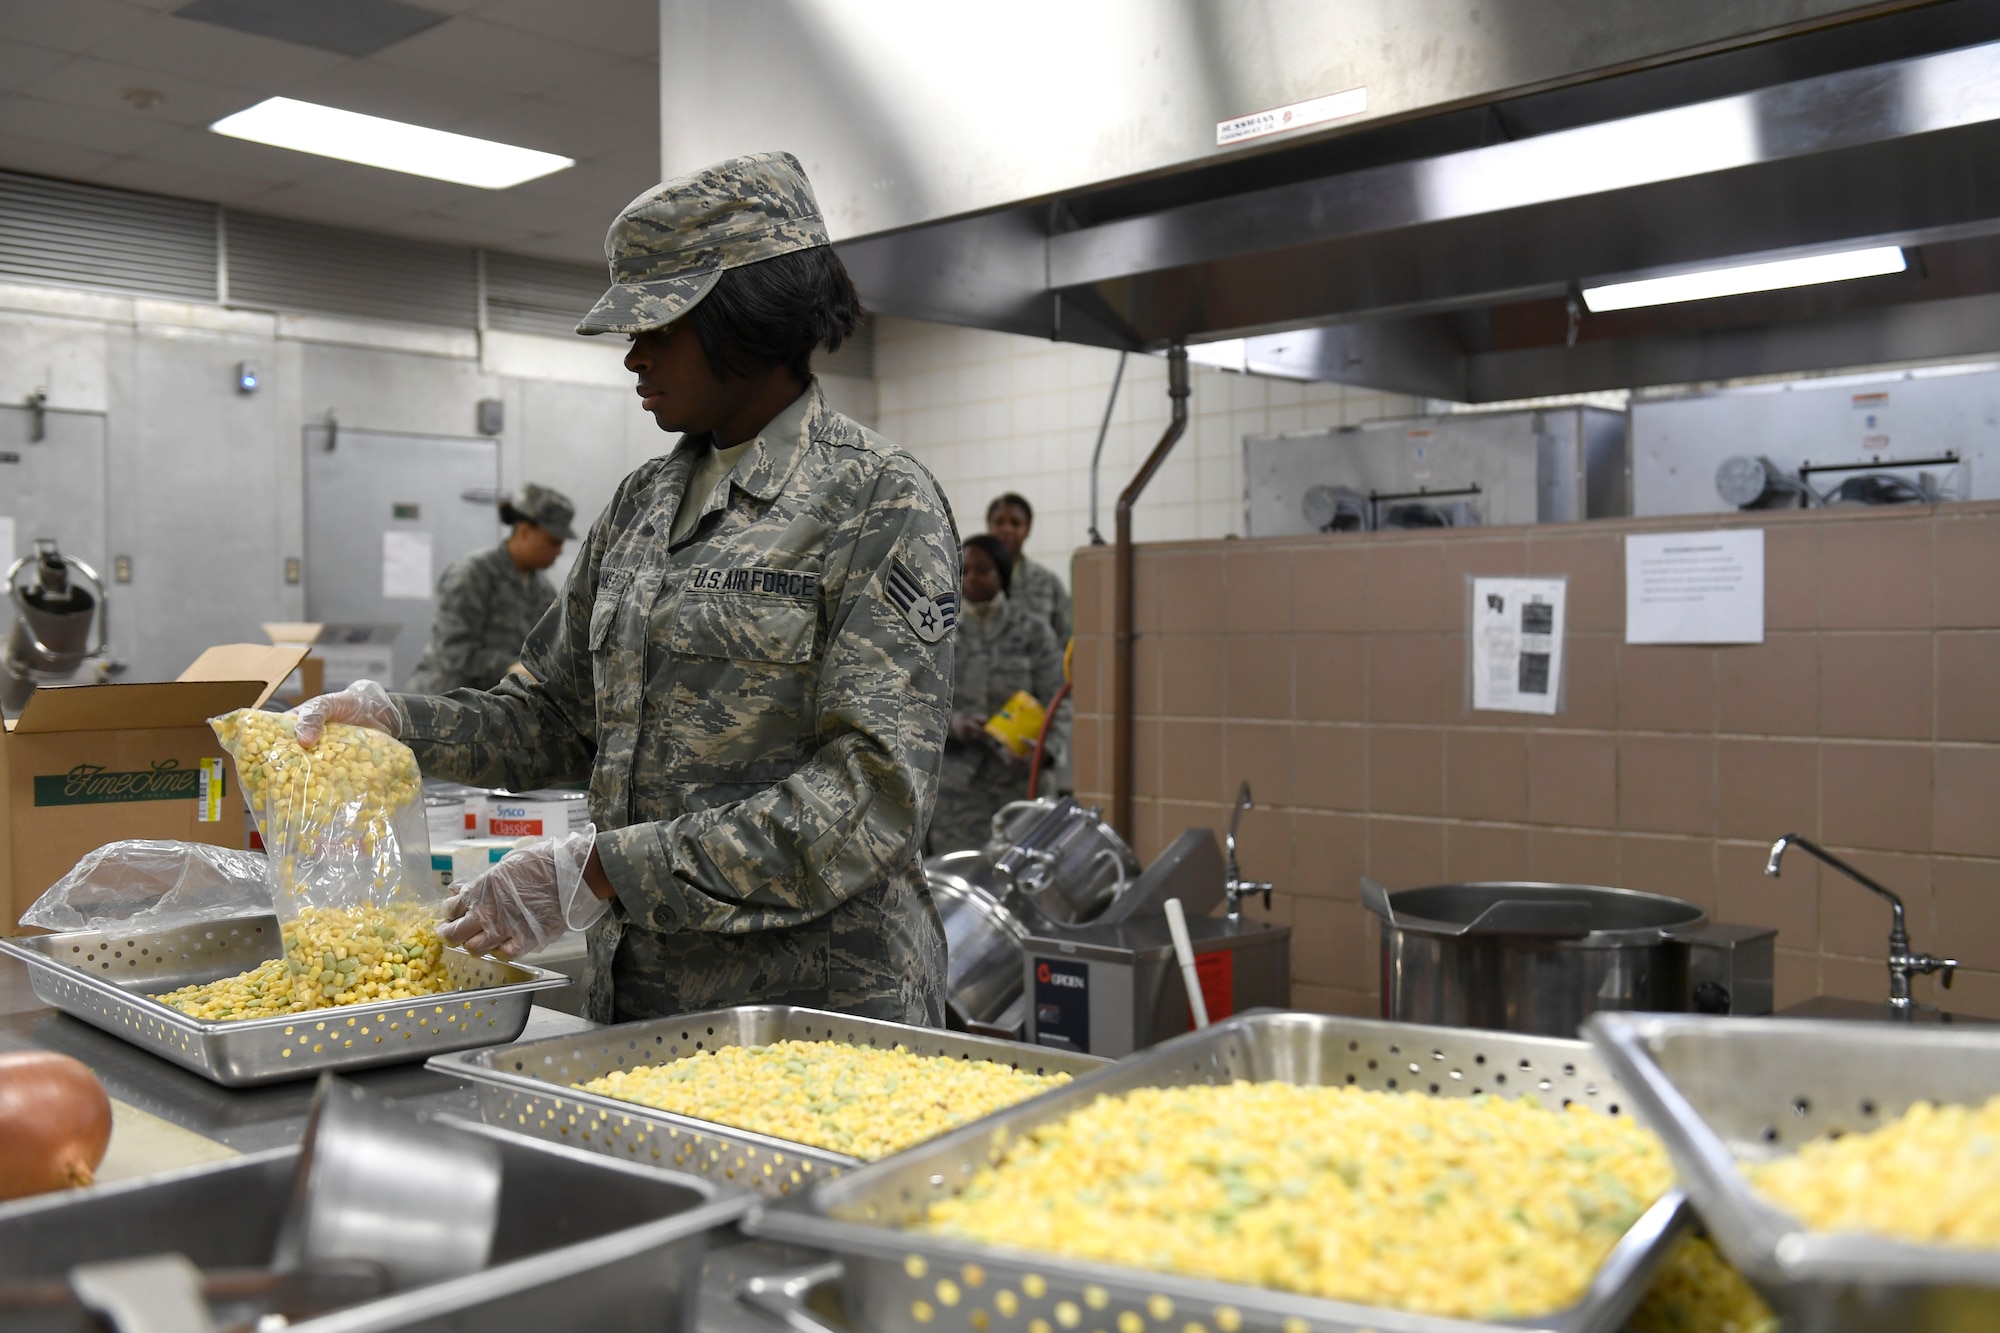 U.S. Air Force Senior Airman Lisa Banks, 145th Force Support Squadron, unpacks corn in preparation for lunch in the dining facility during drill weekend at the North Carolina Air National Guard Base, Charlotte Douglas International Airport, Jan. 12, 2019. Food services Airmen from the North Carolina Air National Guard train members from the Niagara Falls Air Reserve Station, New York, on full-service kitchen operations in preparation for the upcoming Air Force active duty and reserve Hennessy Award competition.